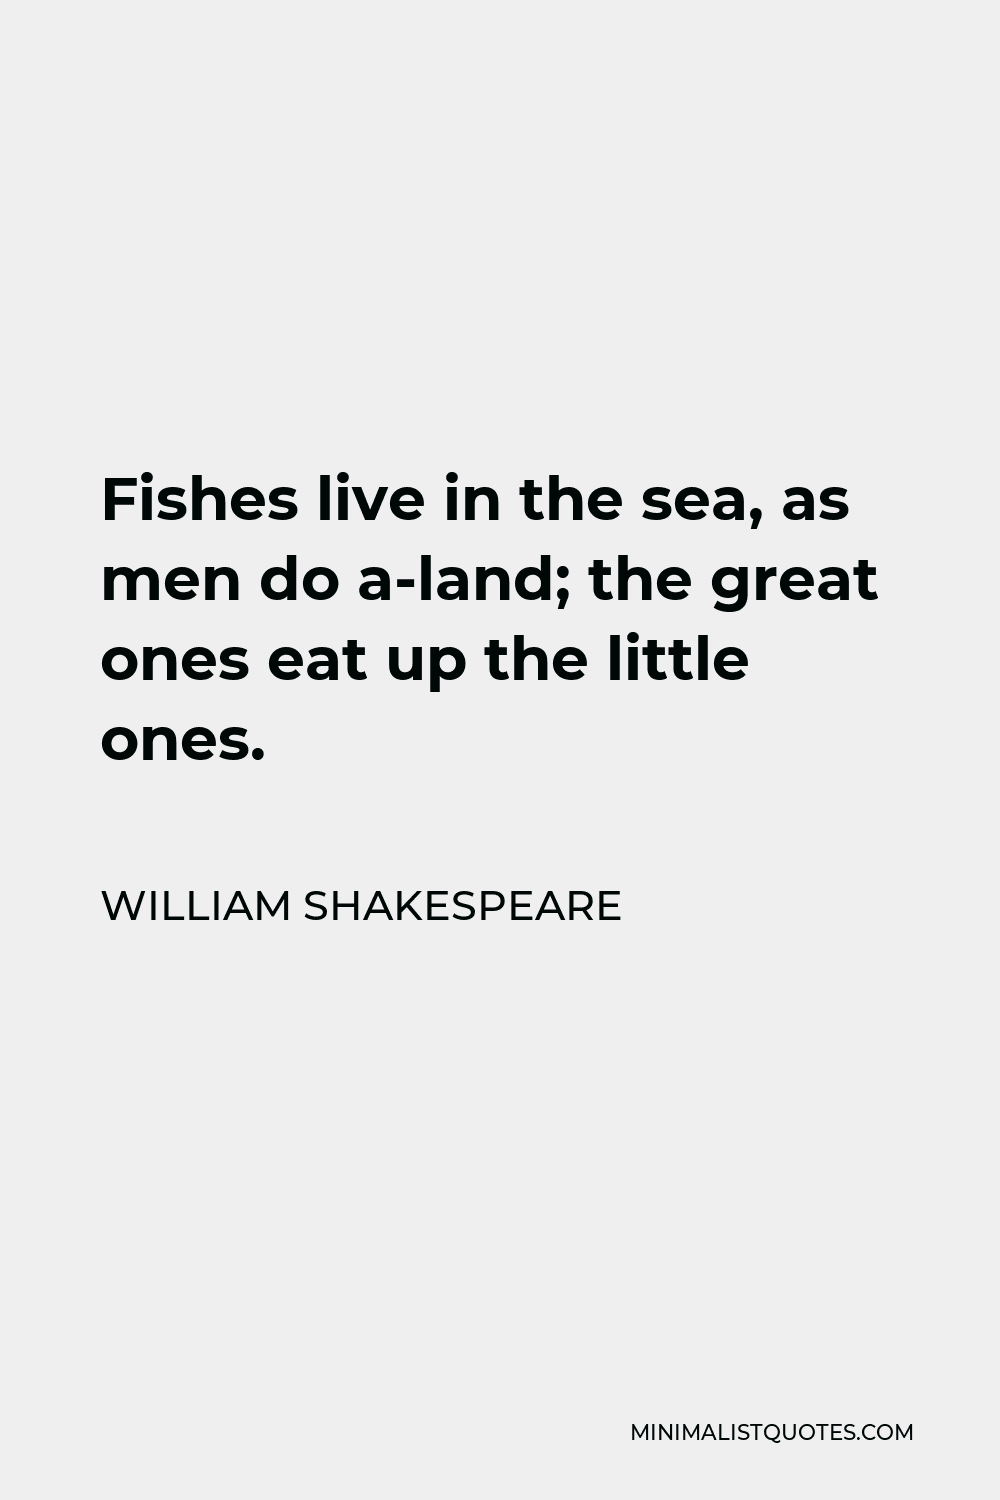 William Shakespeare Quote - Fishes live in the sea, as men do a-land; the great ones eat up the little ones.